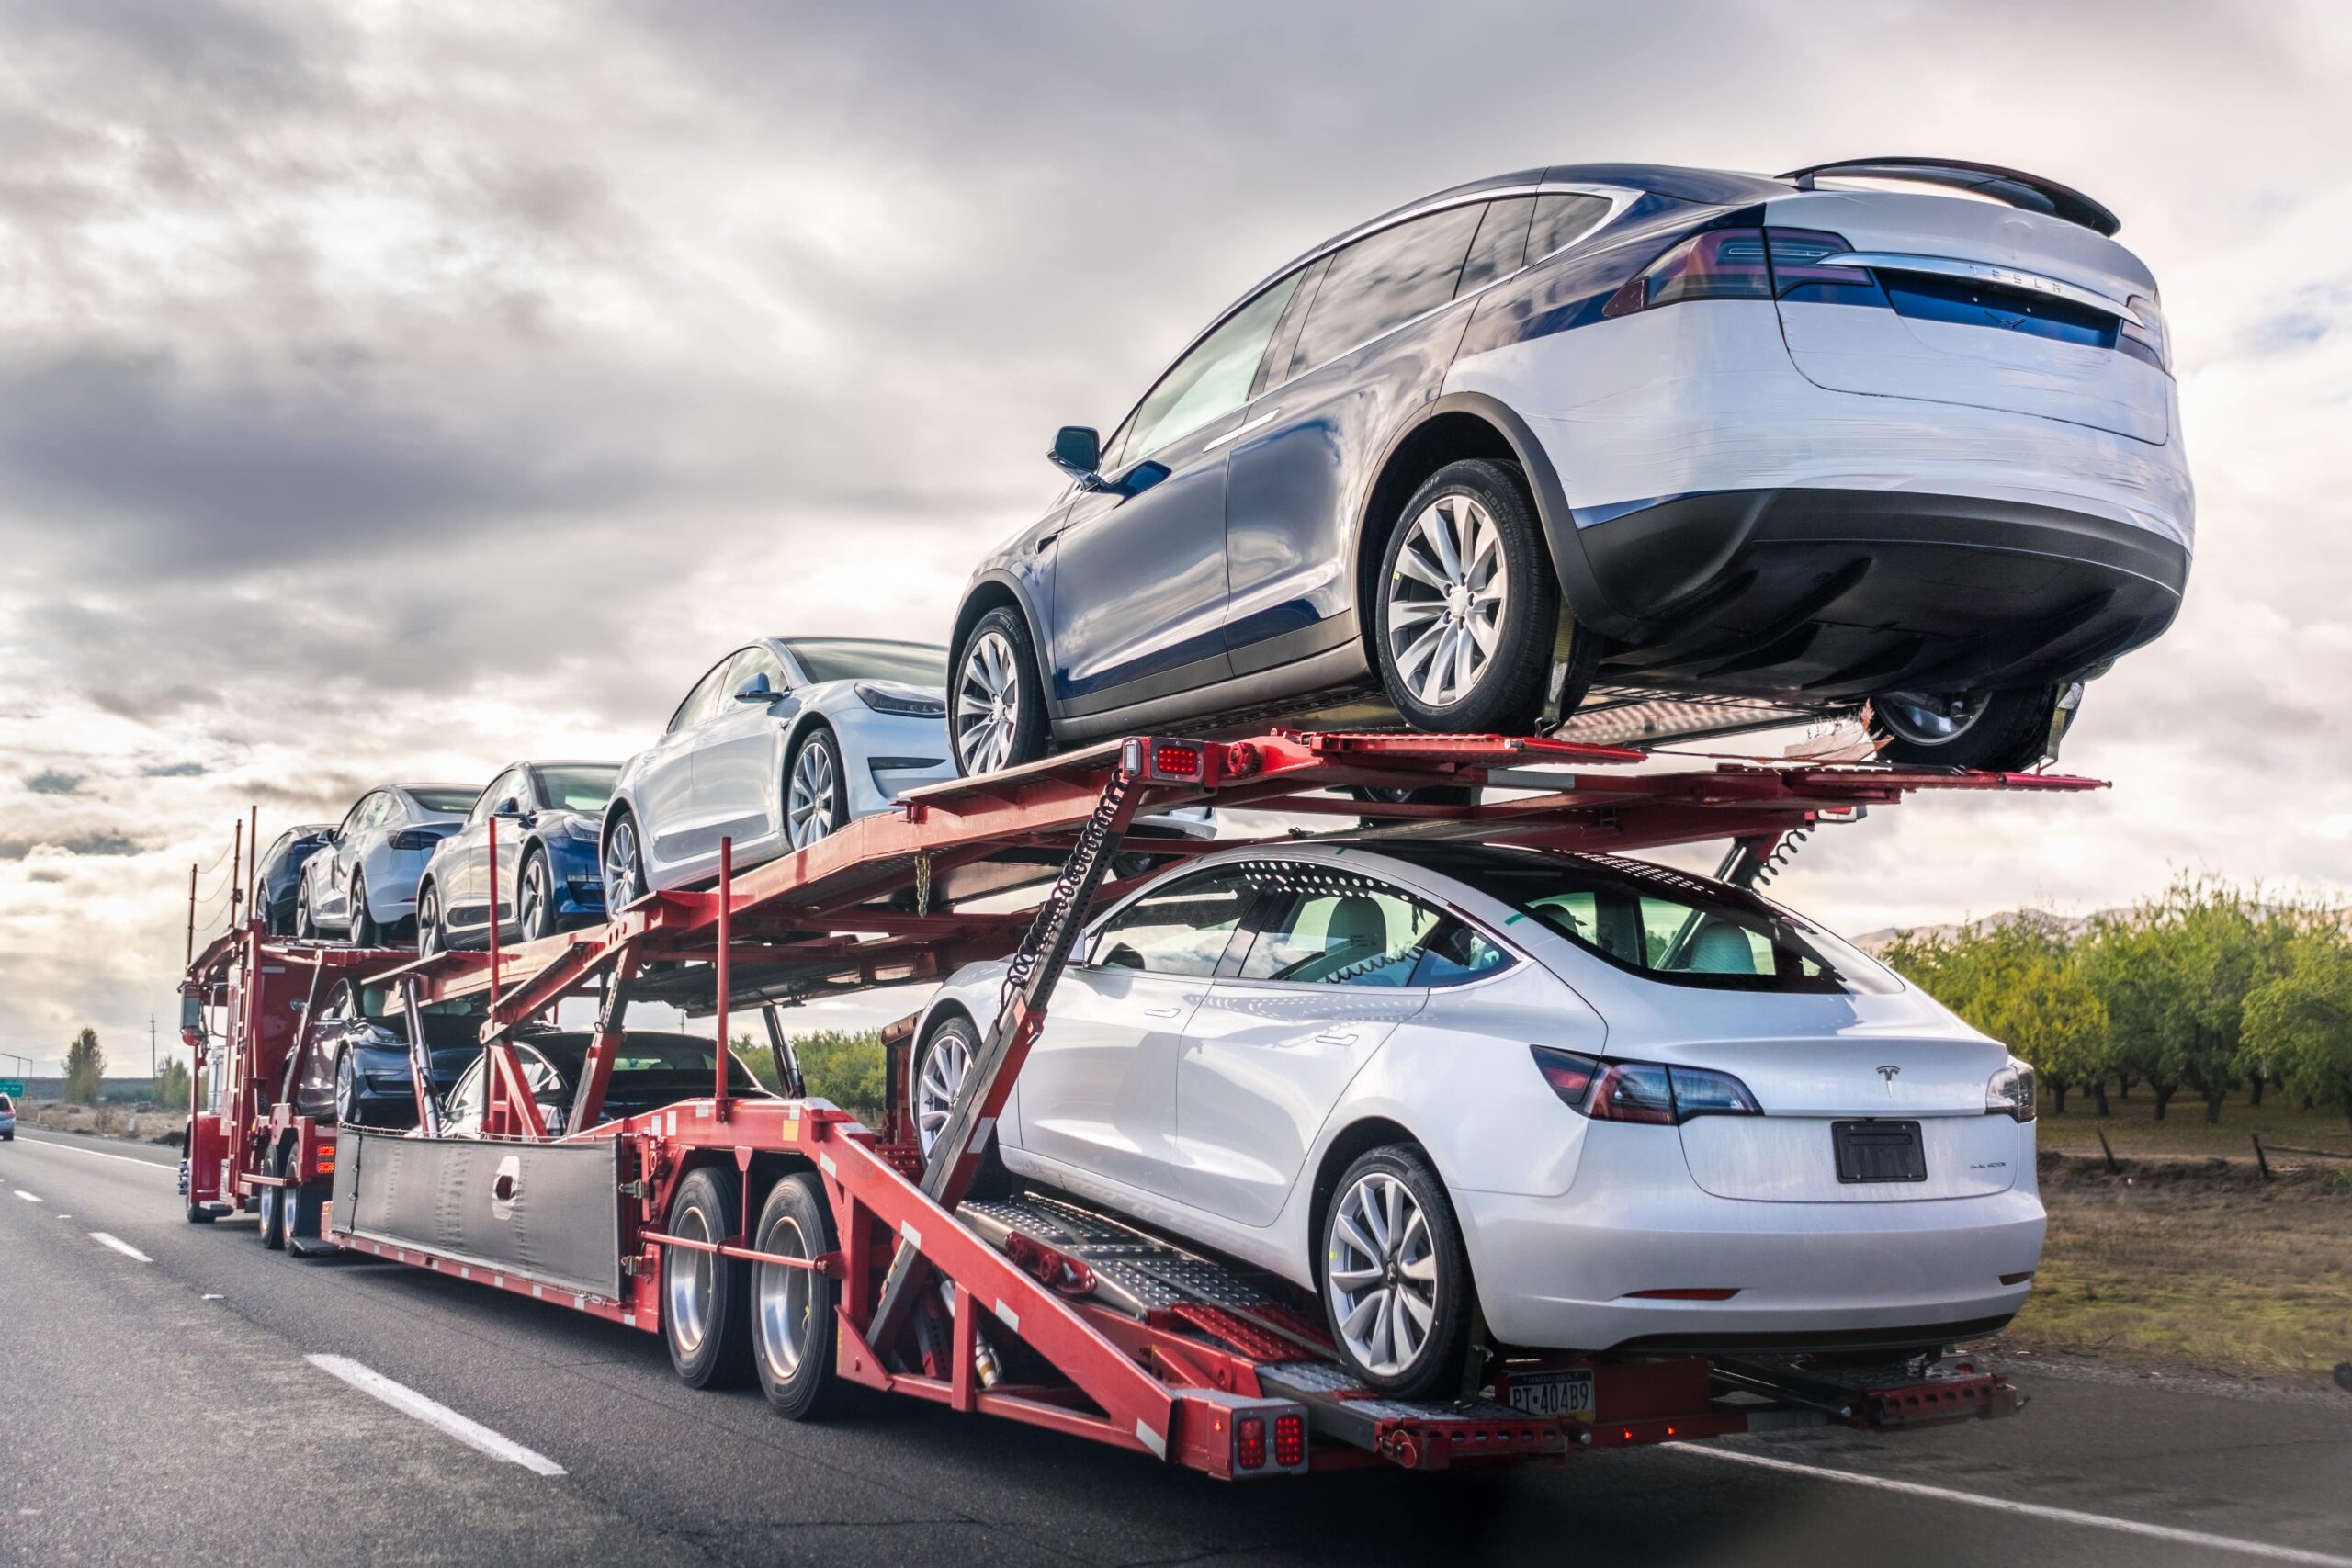 Car Shipping Made Simple: 7 Tips for Shipping a Non-Running Vehicle